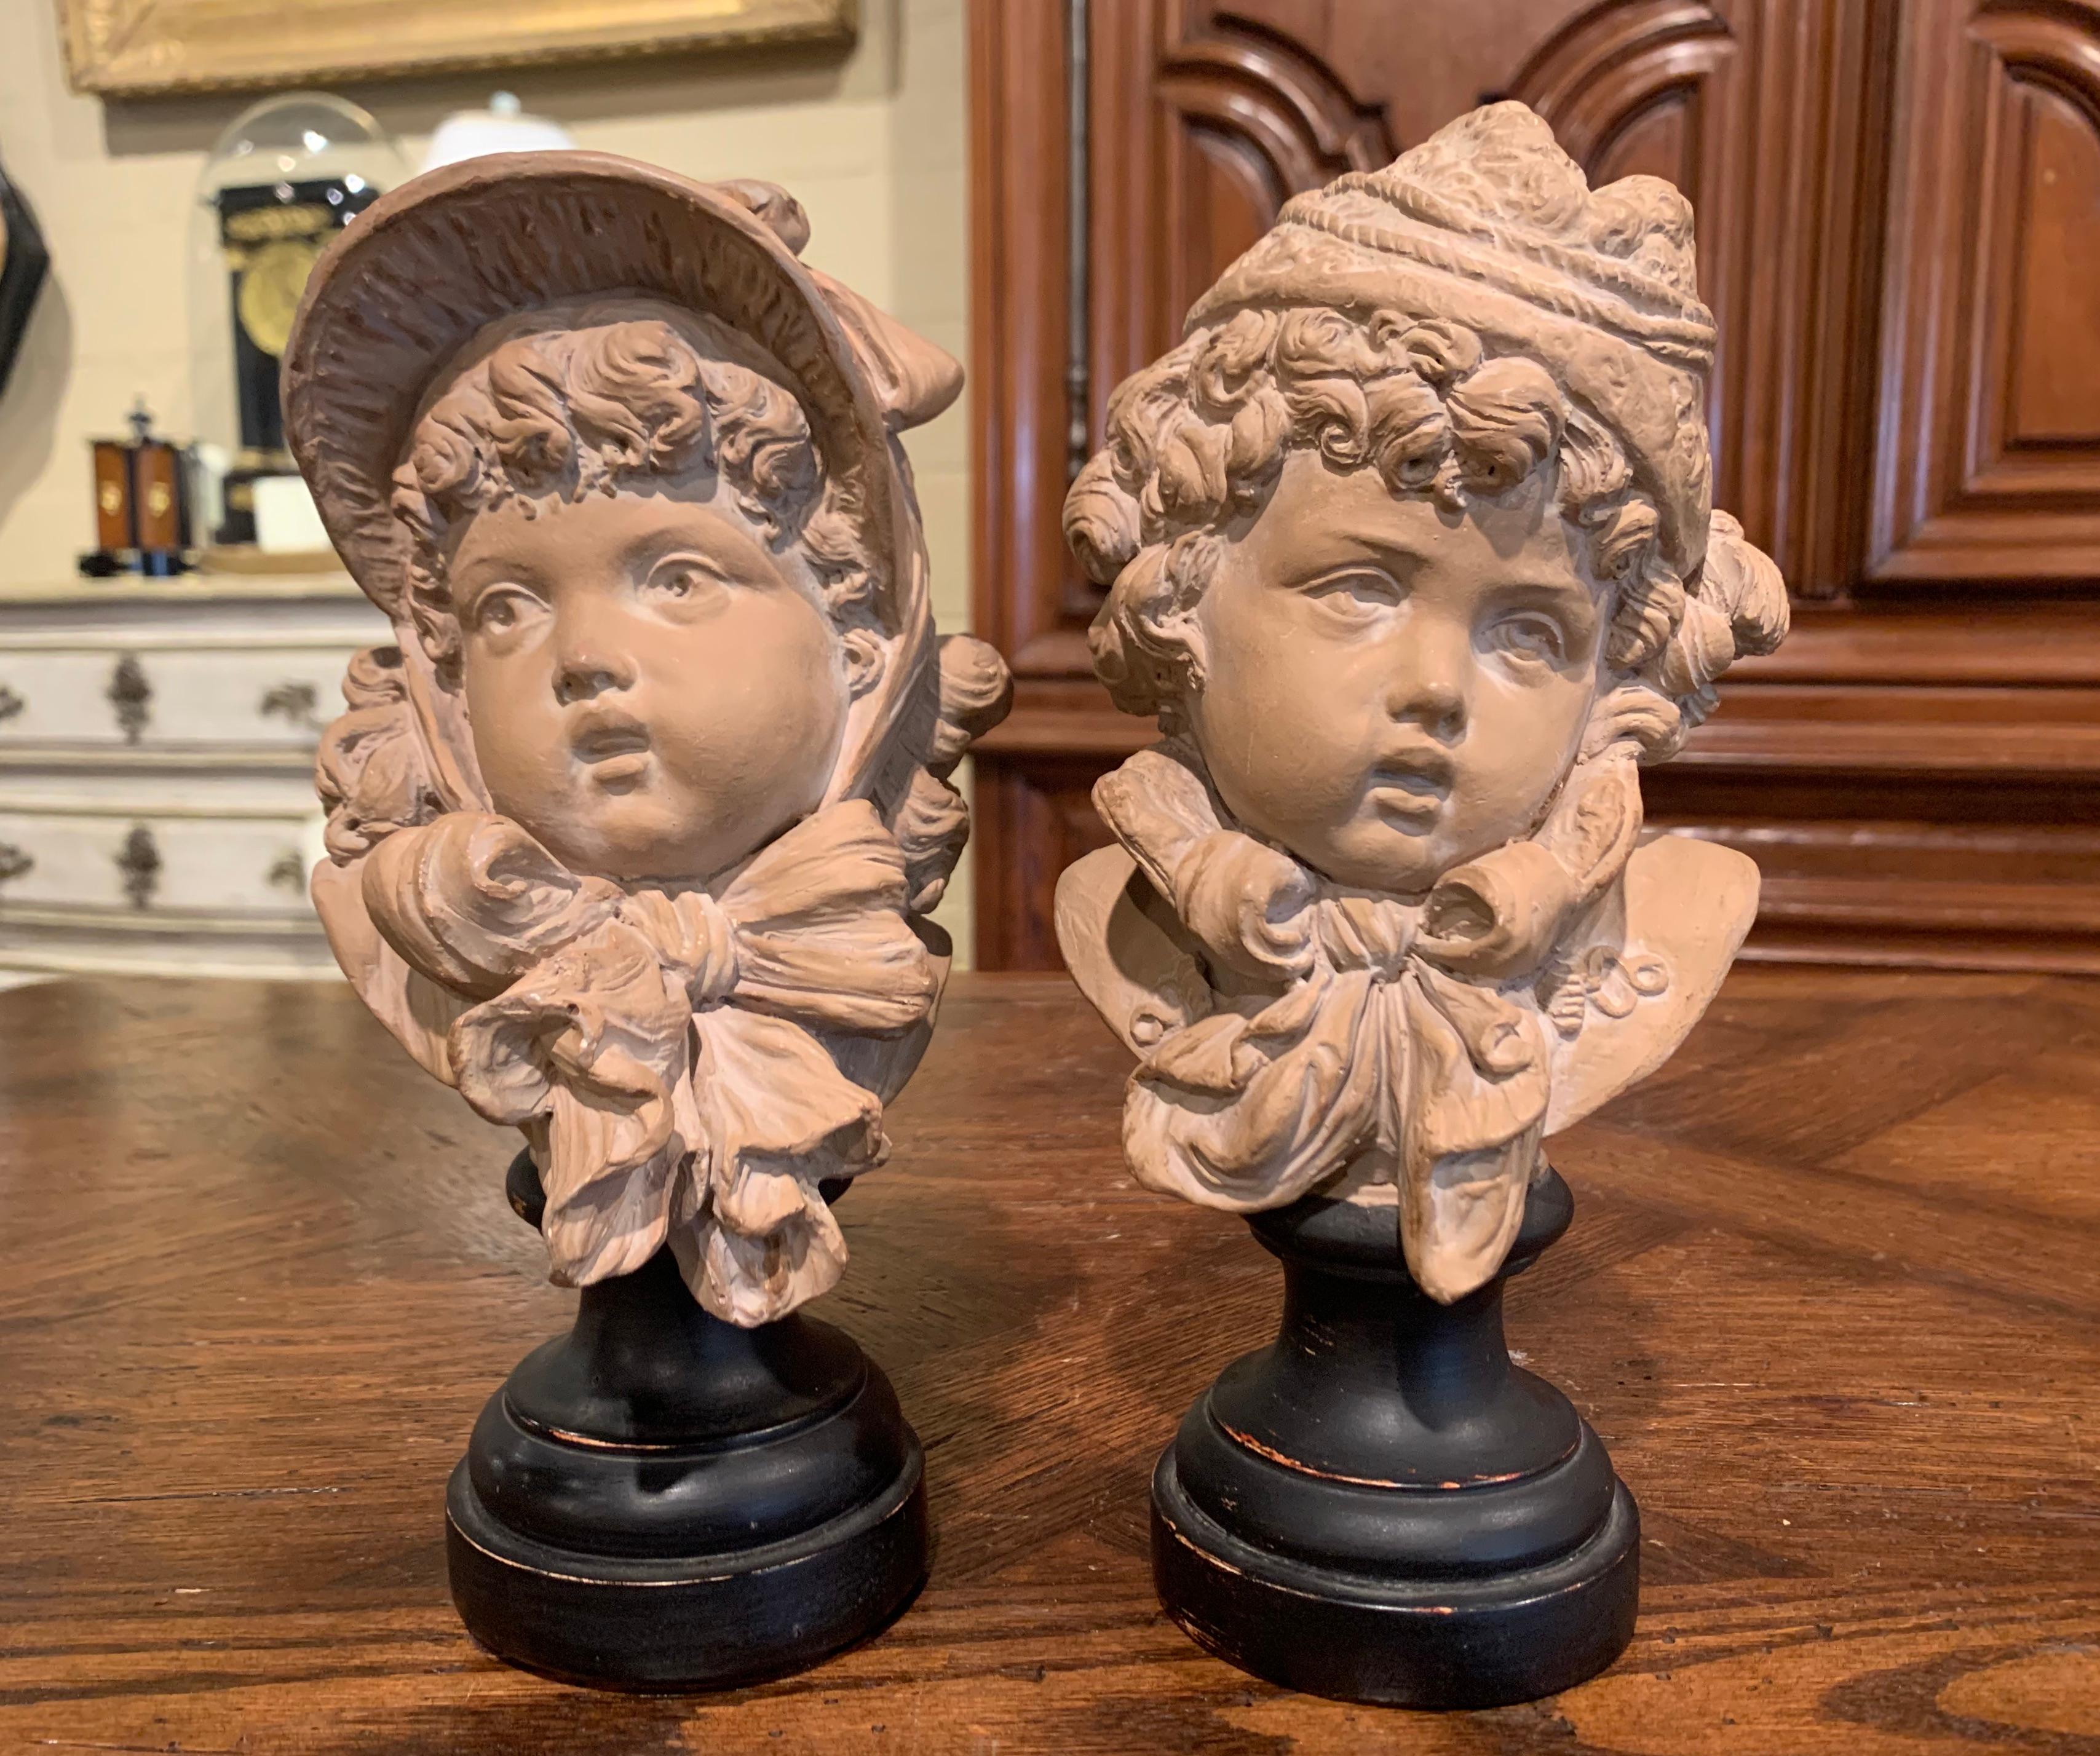 Pair of 19th Century French Terracotta Busts of Children Signed E. Guillemin In Excellent Condition For Sale In Dallas, TX